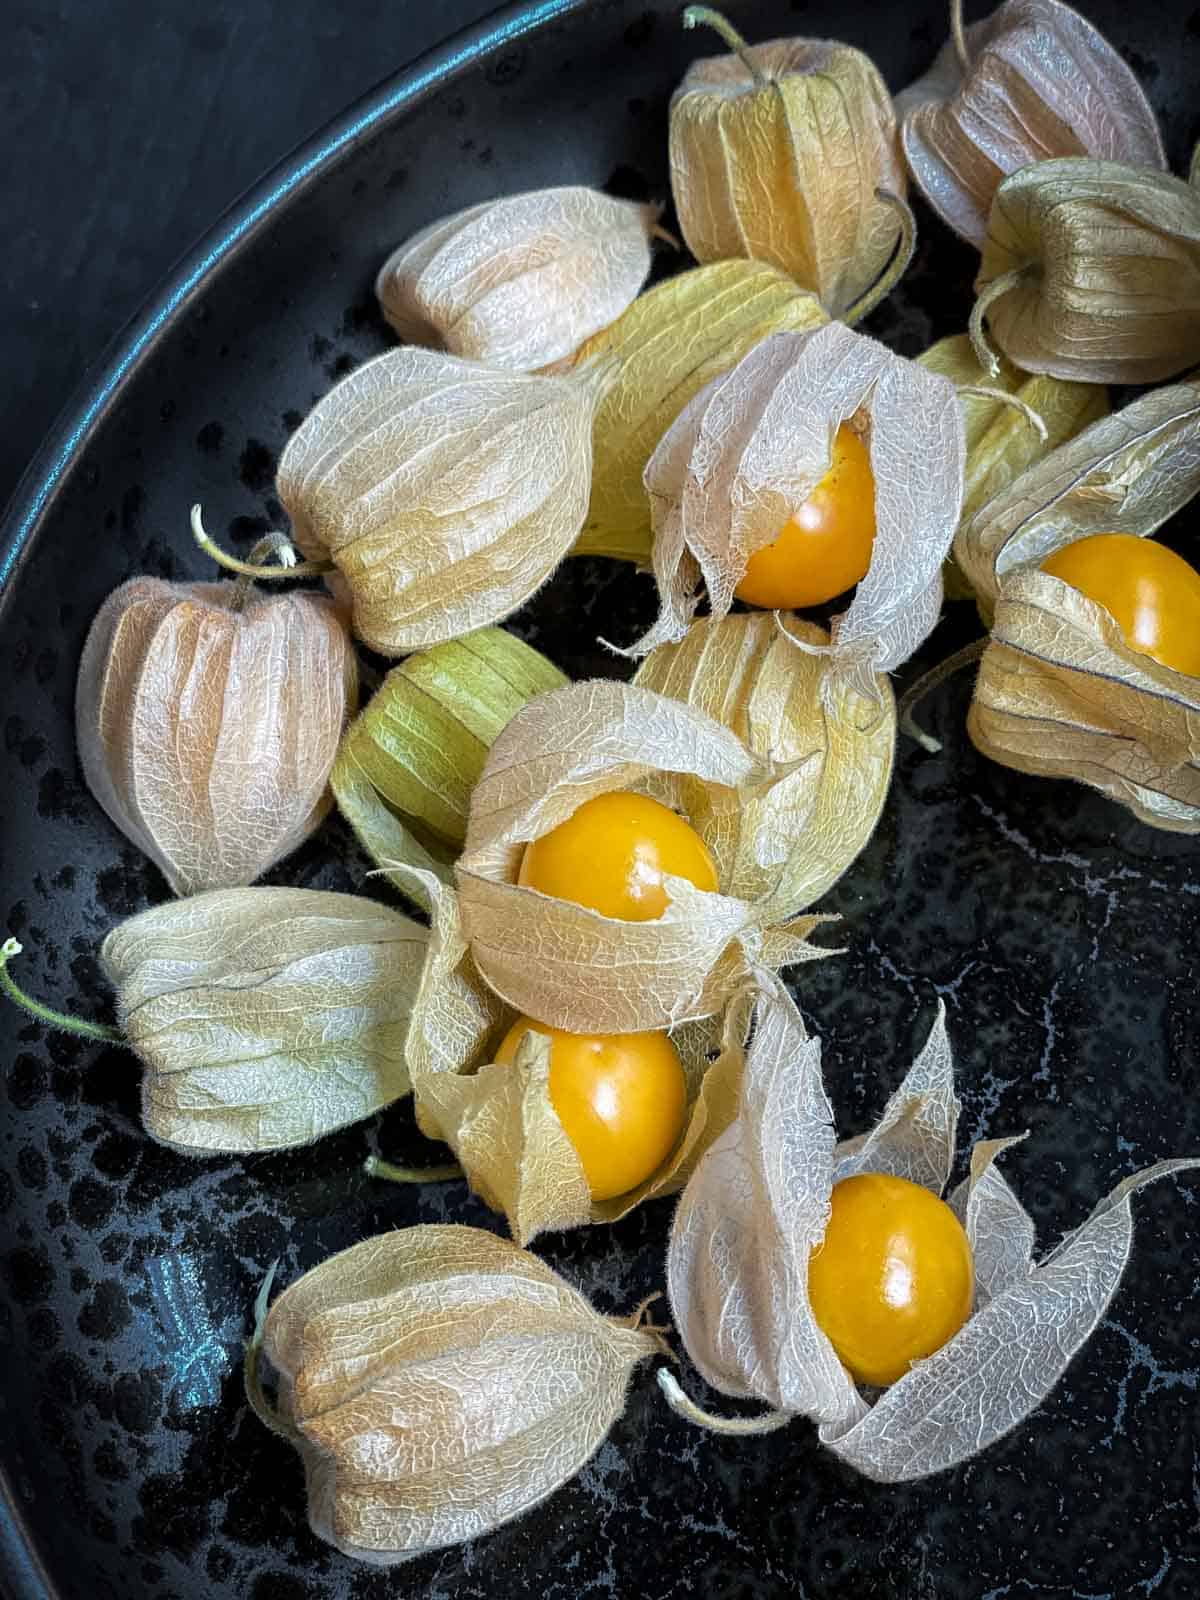 Golden berry or cape gooseberry ono a black and grey plate.